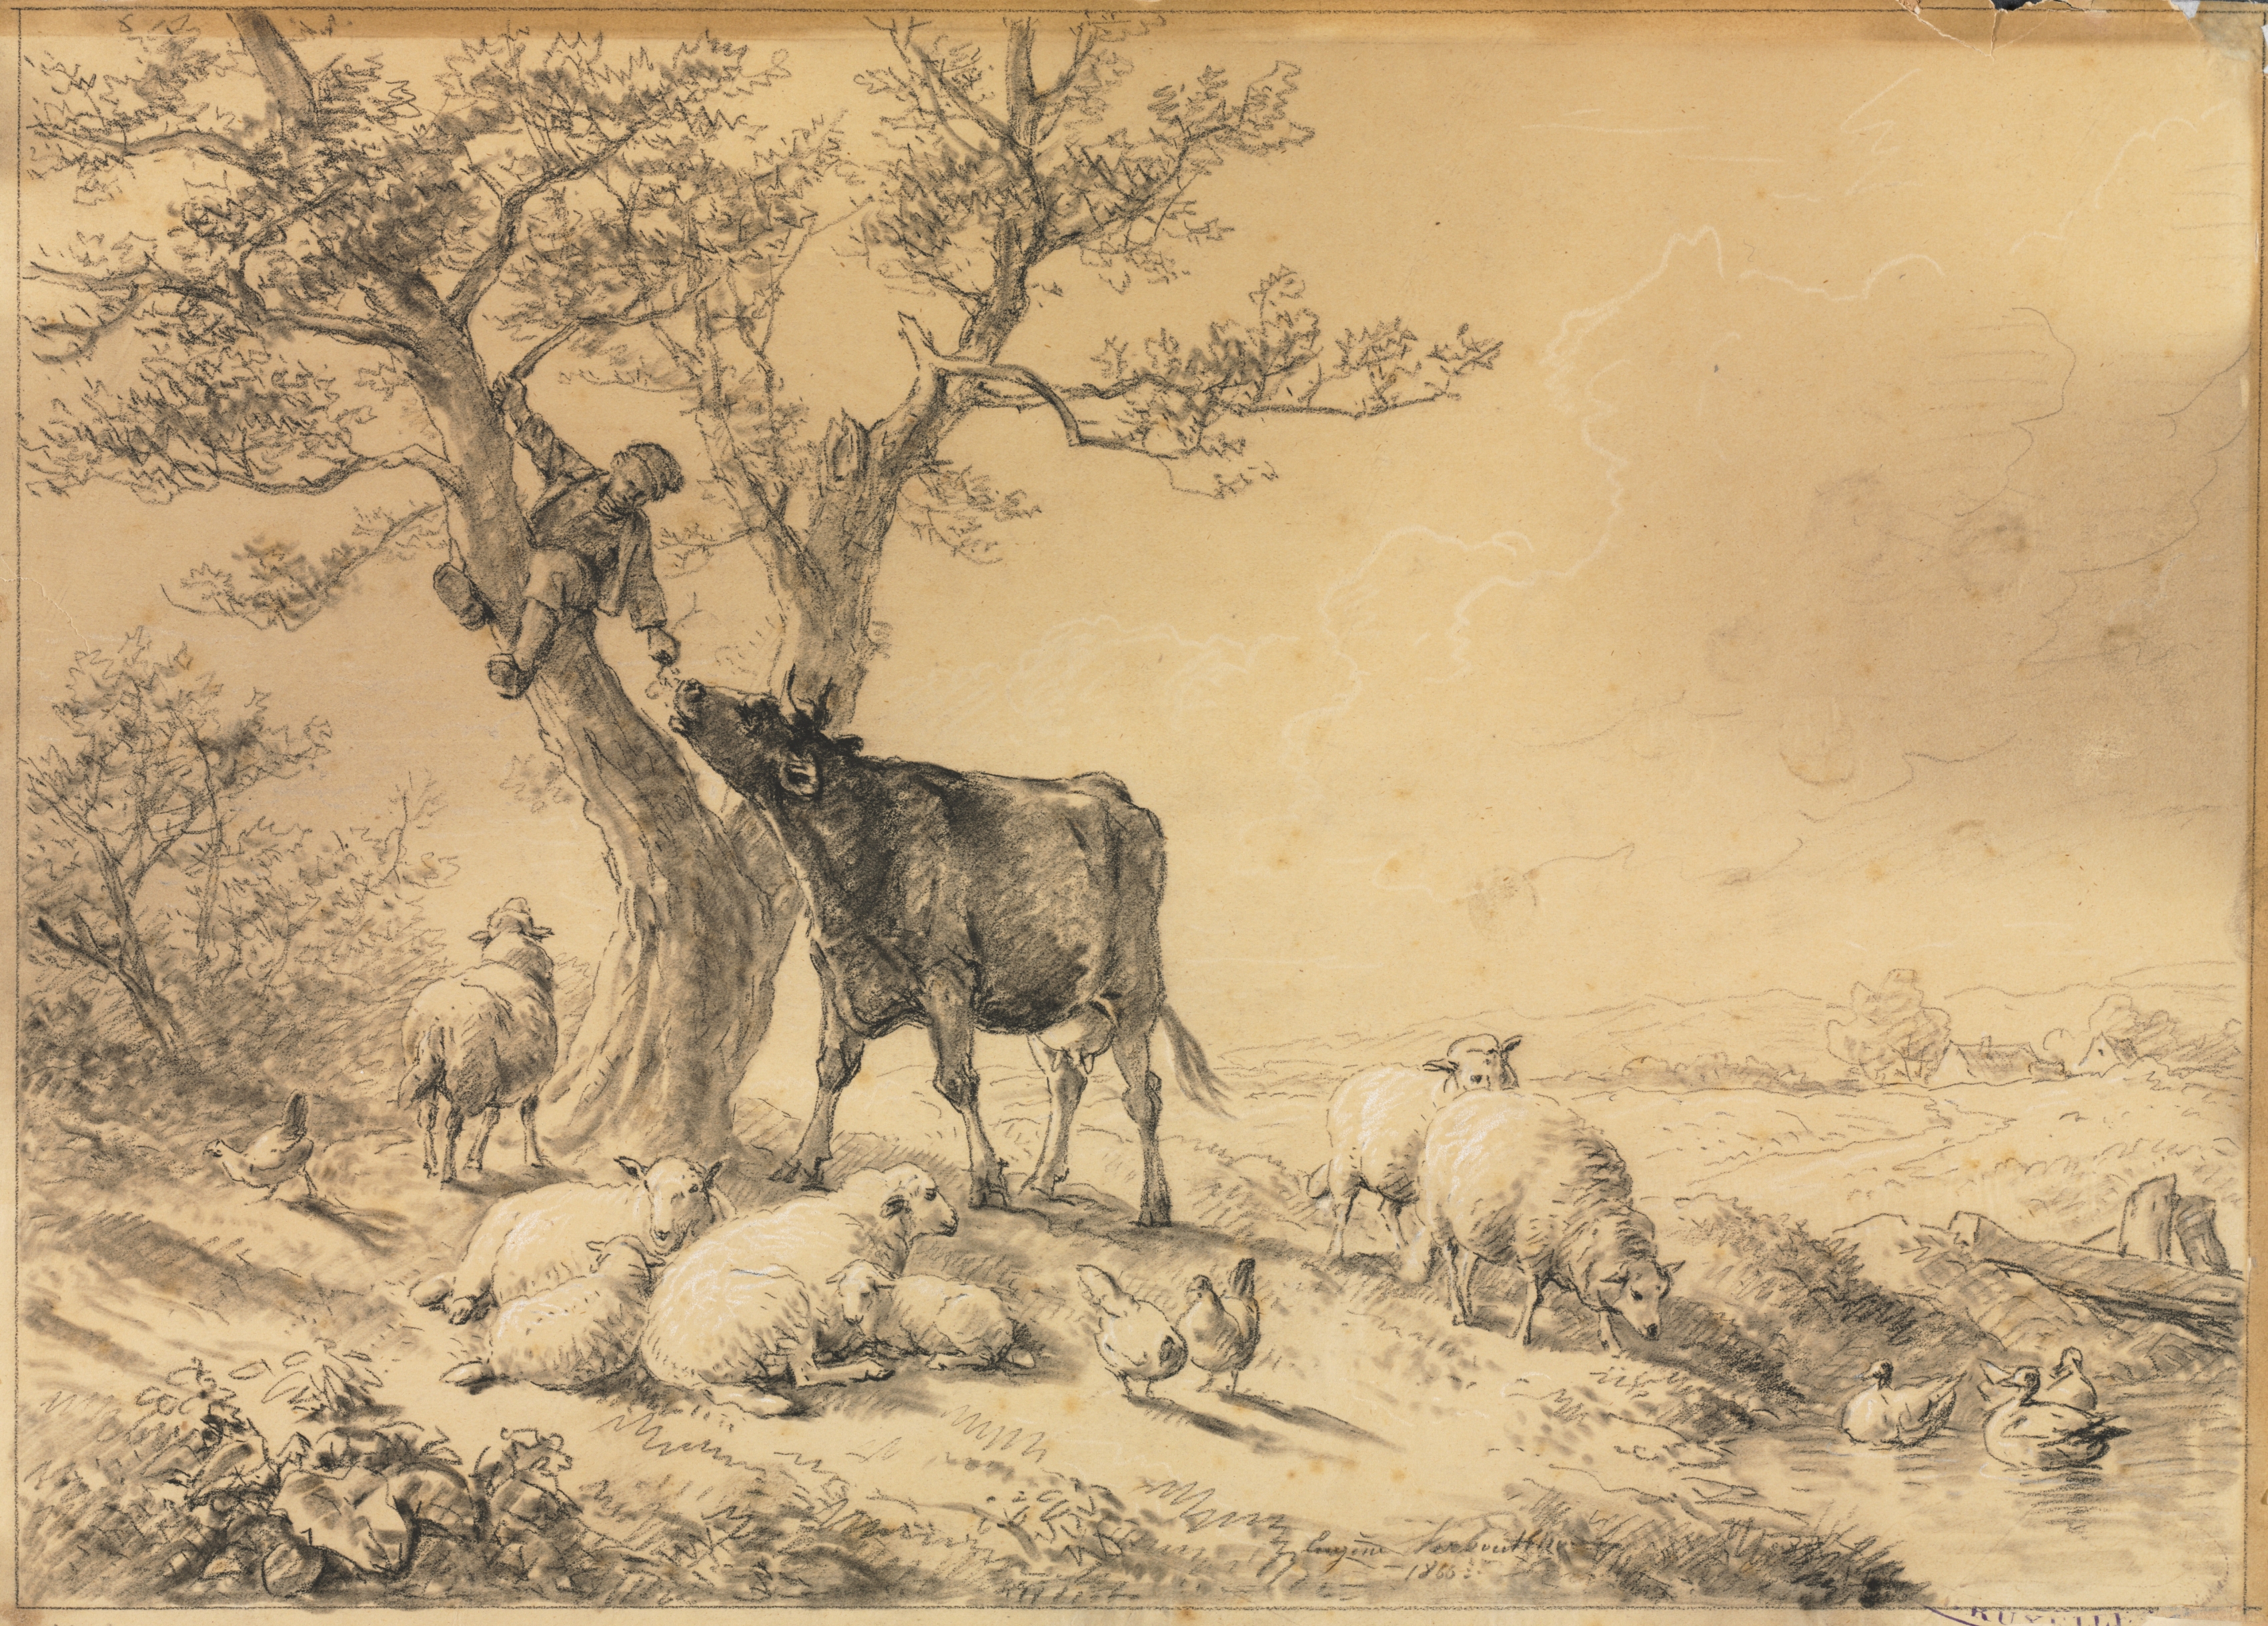 Landscape with Animals and Boy in Tree